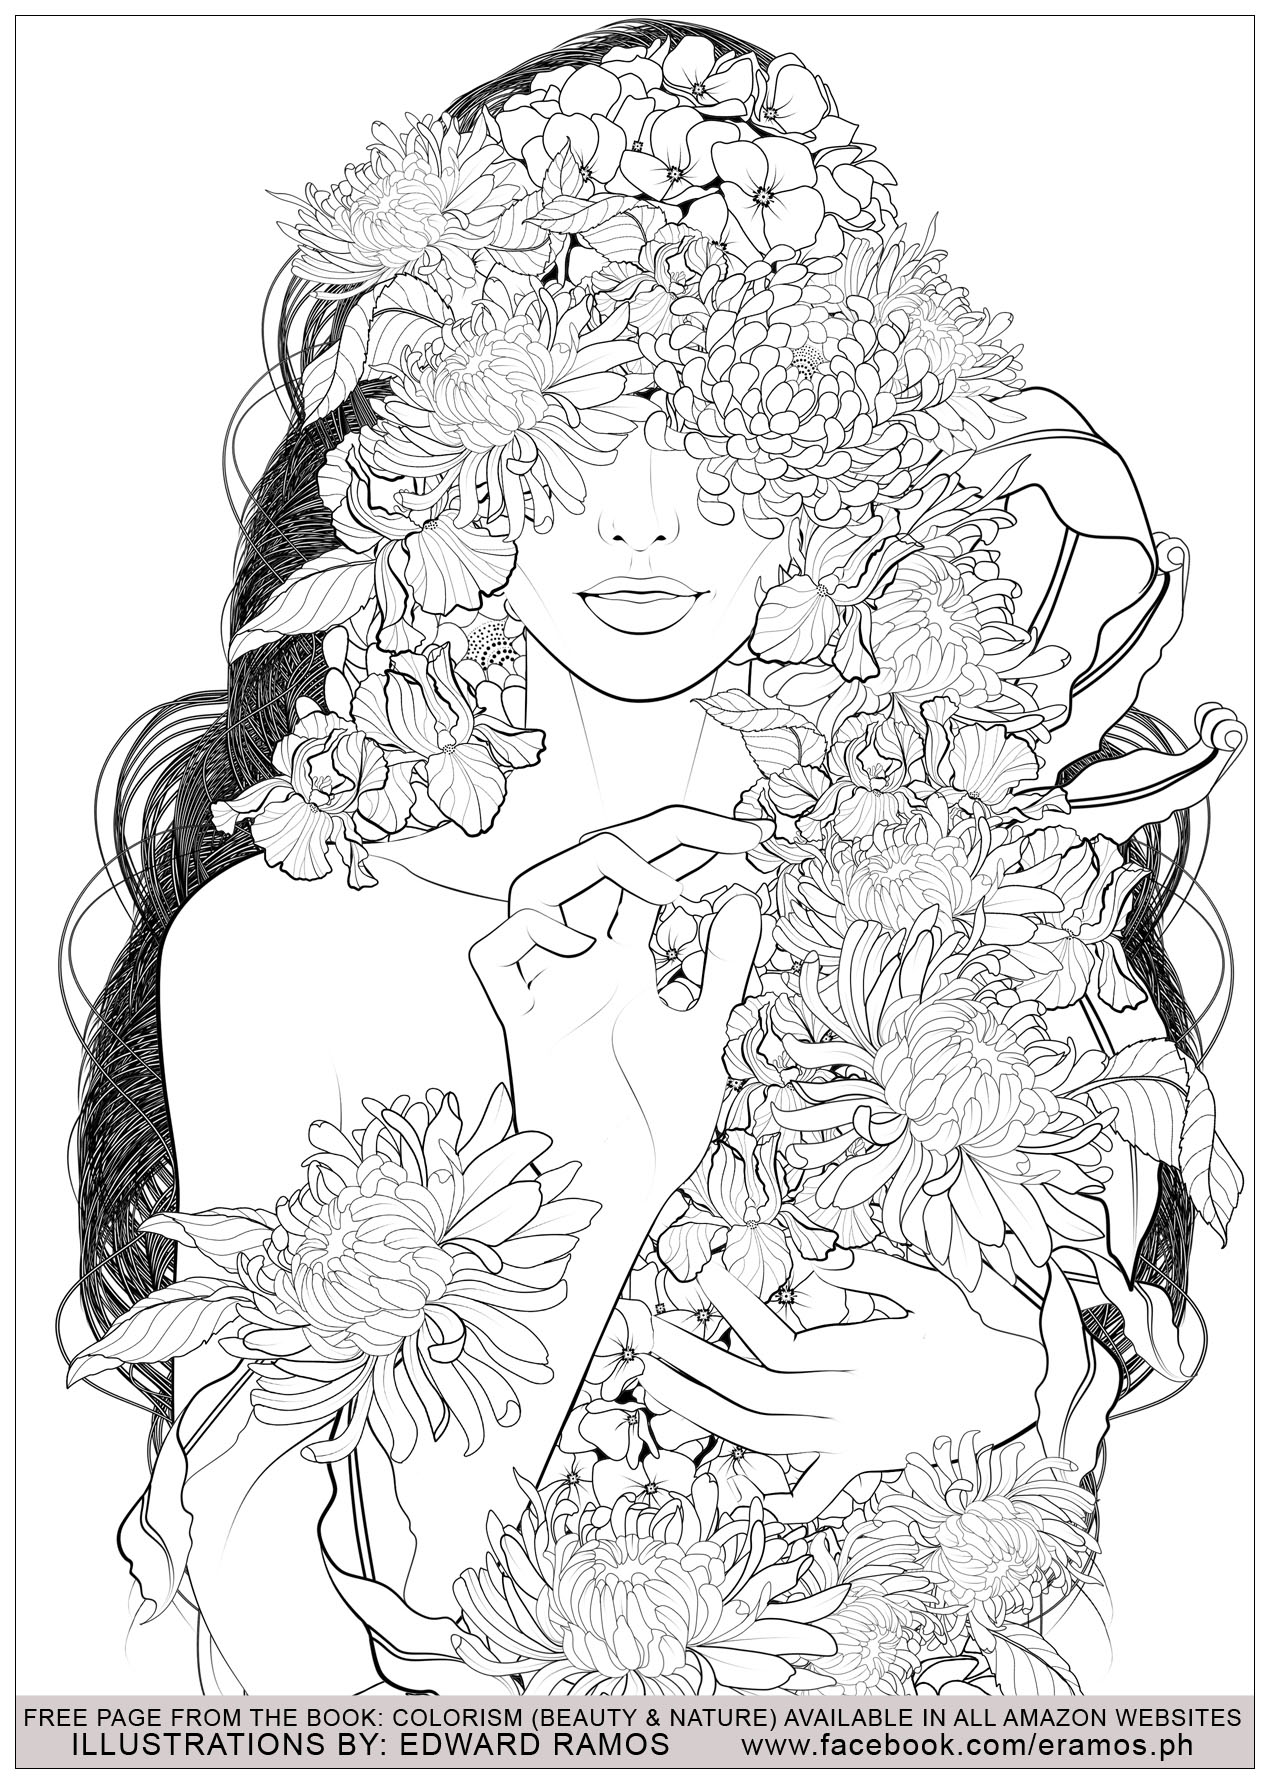 Illustration from the book Colorism - Beauty & Nature by Edward Ramos - 5, Artist : Edward Ramos